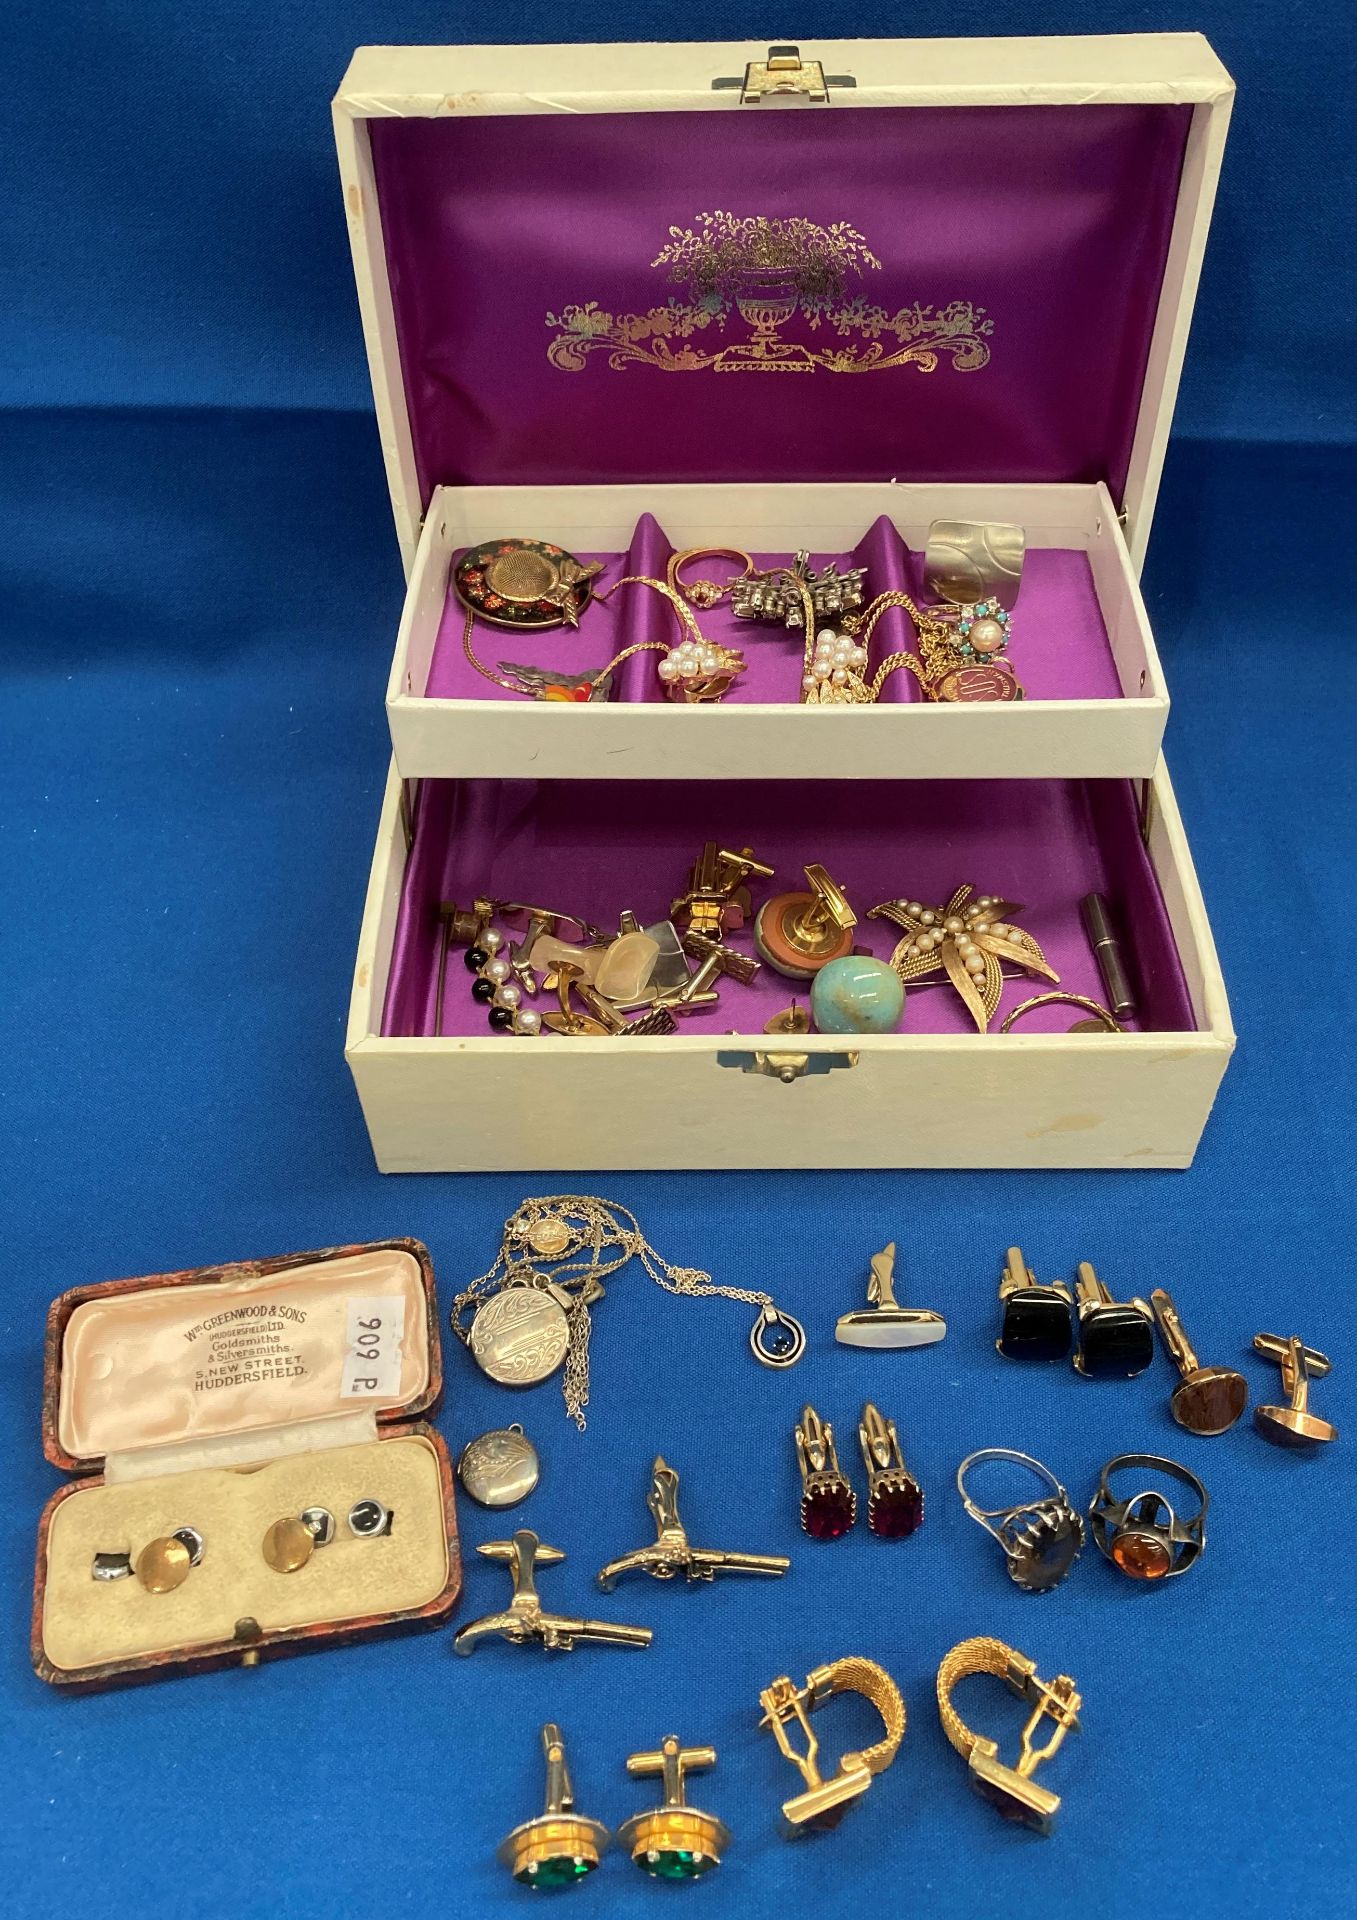 Jewellery box and contents - two silver lockets, a silver chain and pendant with stone,